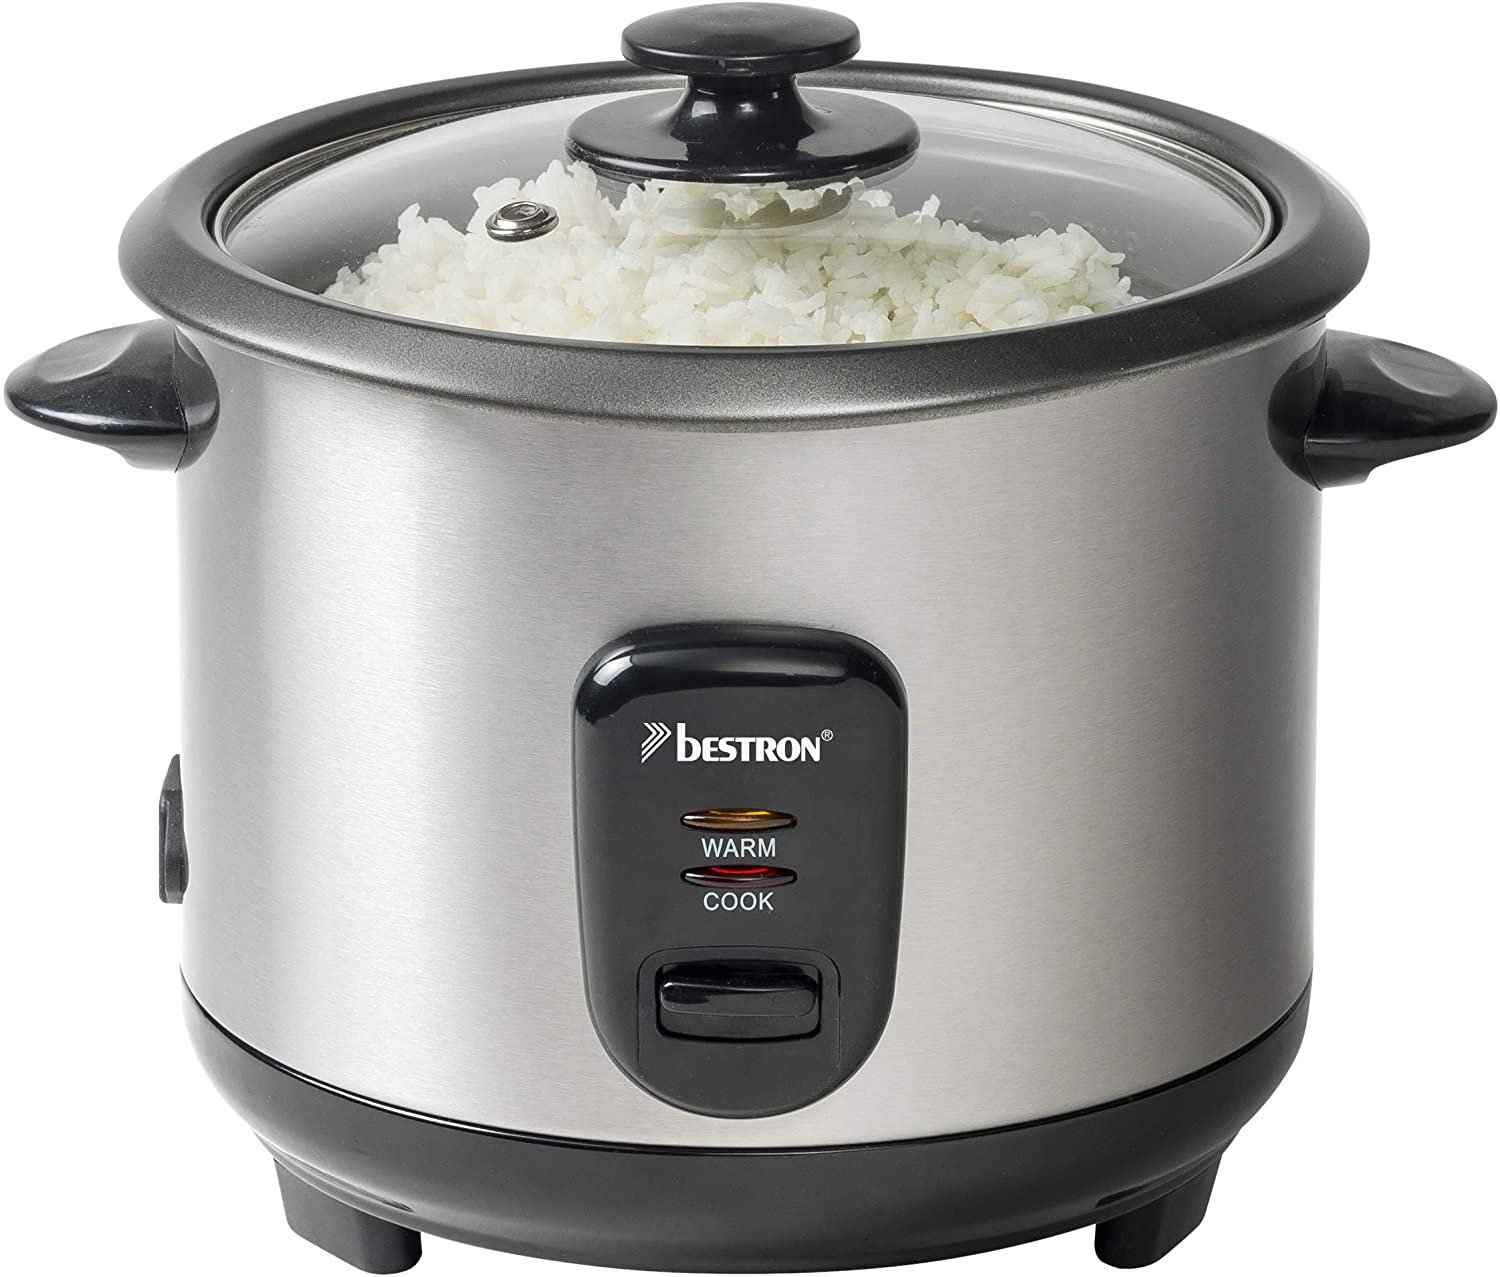 Bestron Rice Cooker for 4-6 People, Includes Steamer Attachment, Measuring Cup & Rice Spoon, Non-Stick Coating and Indicator Light, Dishwasher Safe, 1 Litre, 400 W, Colour: Silver